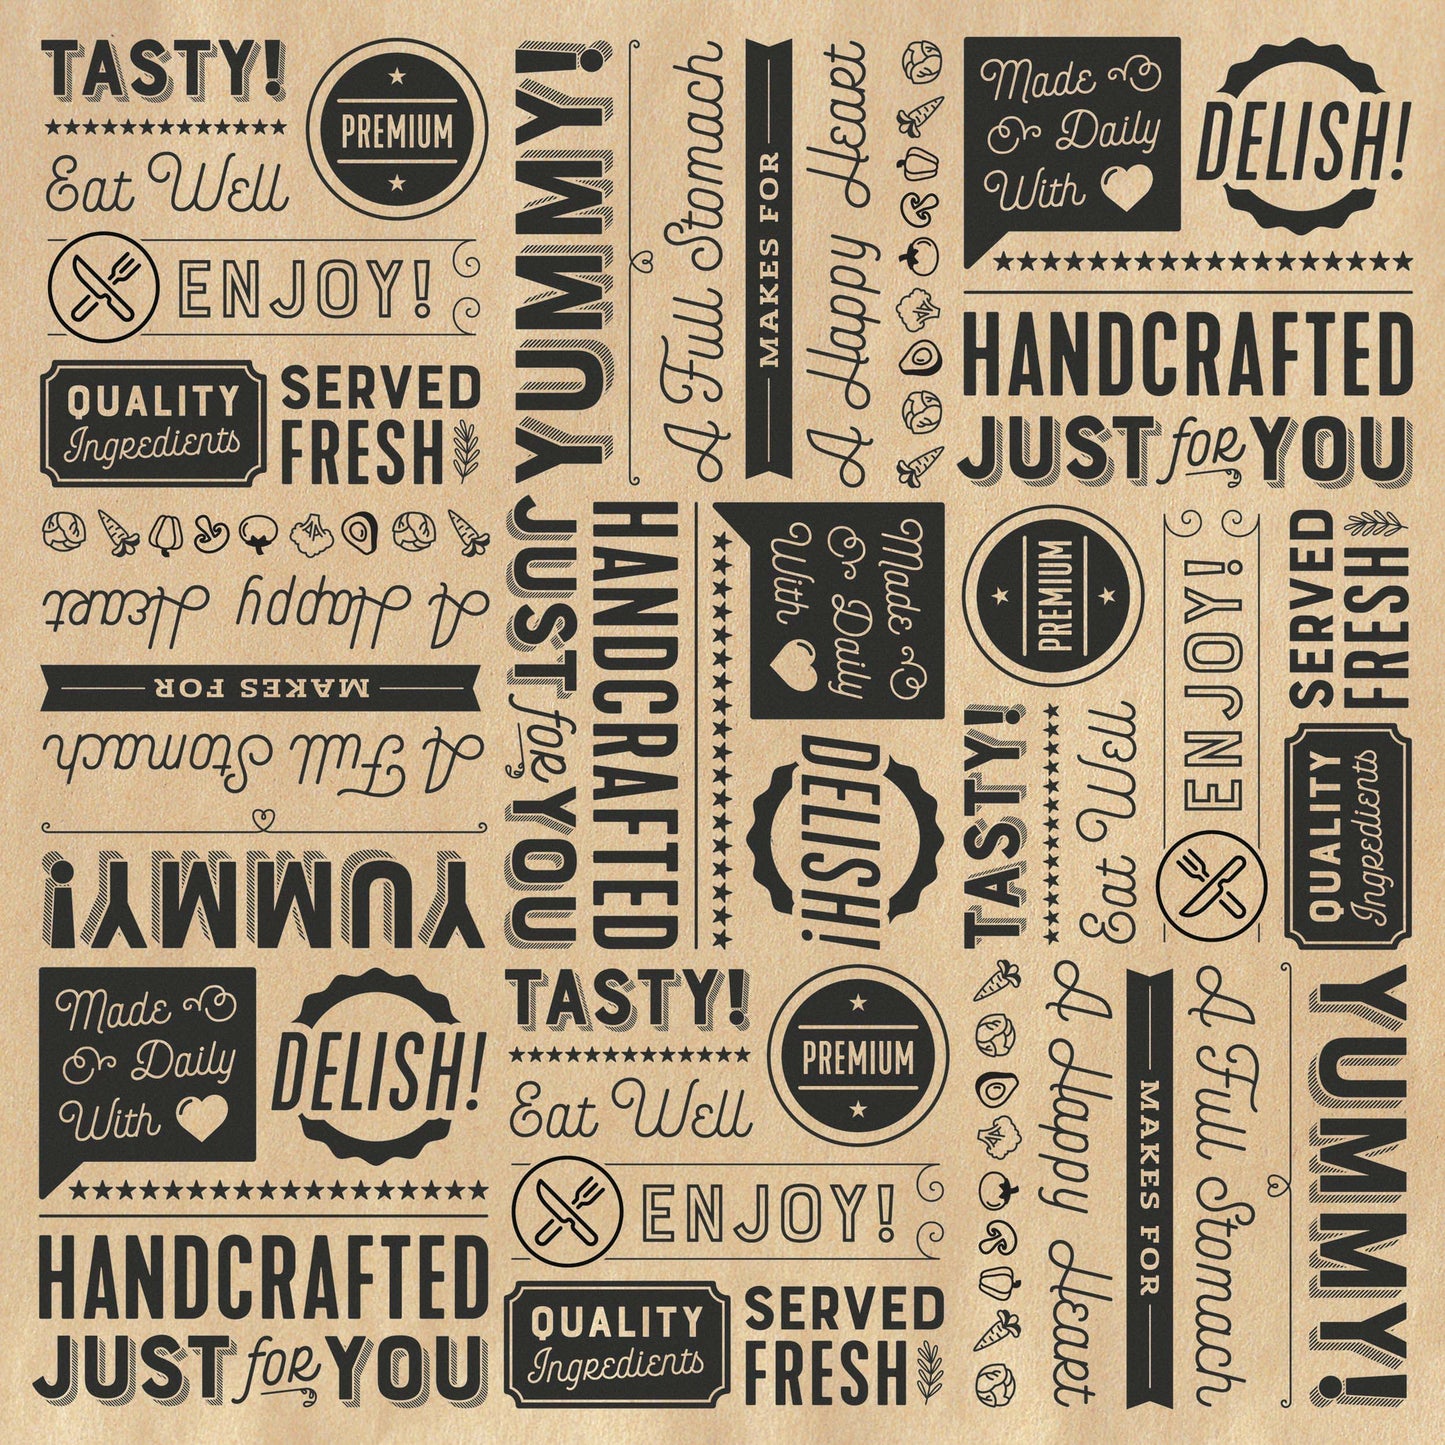 12" x 12" Grease-Resistant Food-Safe Sandwich Wrap Paper / Deli Wrap Paper / Generic Typography Theme on Brown Paper with Black Ink, 1000 pieces./cs.